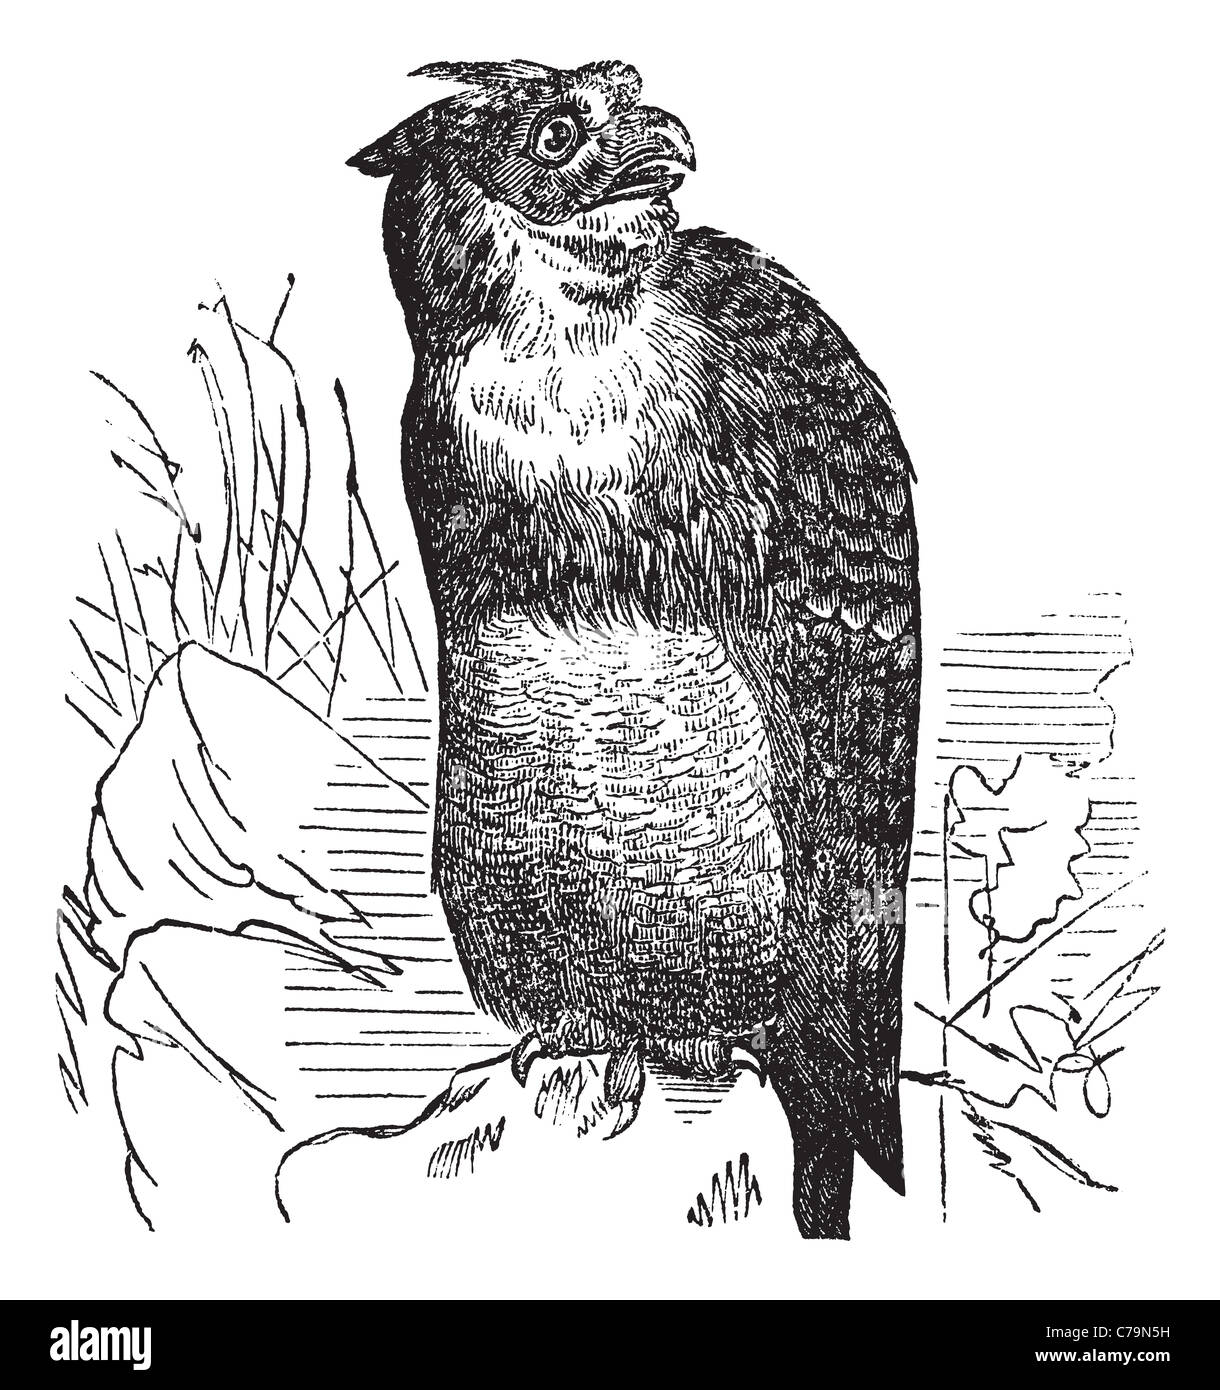 Great Horned Owl or Tiger Owl or Bubo virginianus, vintage engraving. Old engraved illustration of a Great Horned Owl. Stock Photo